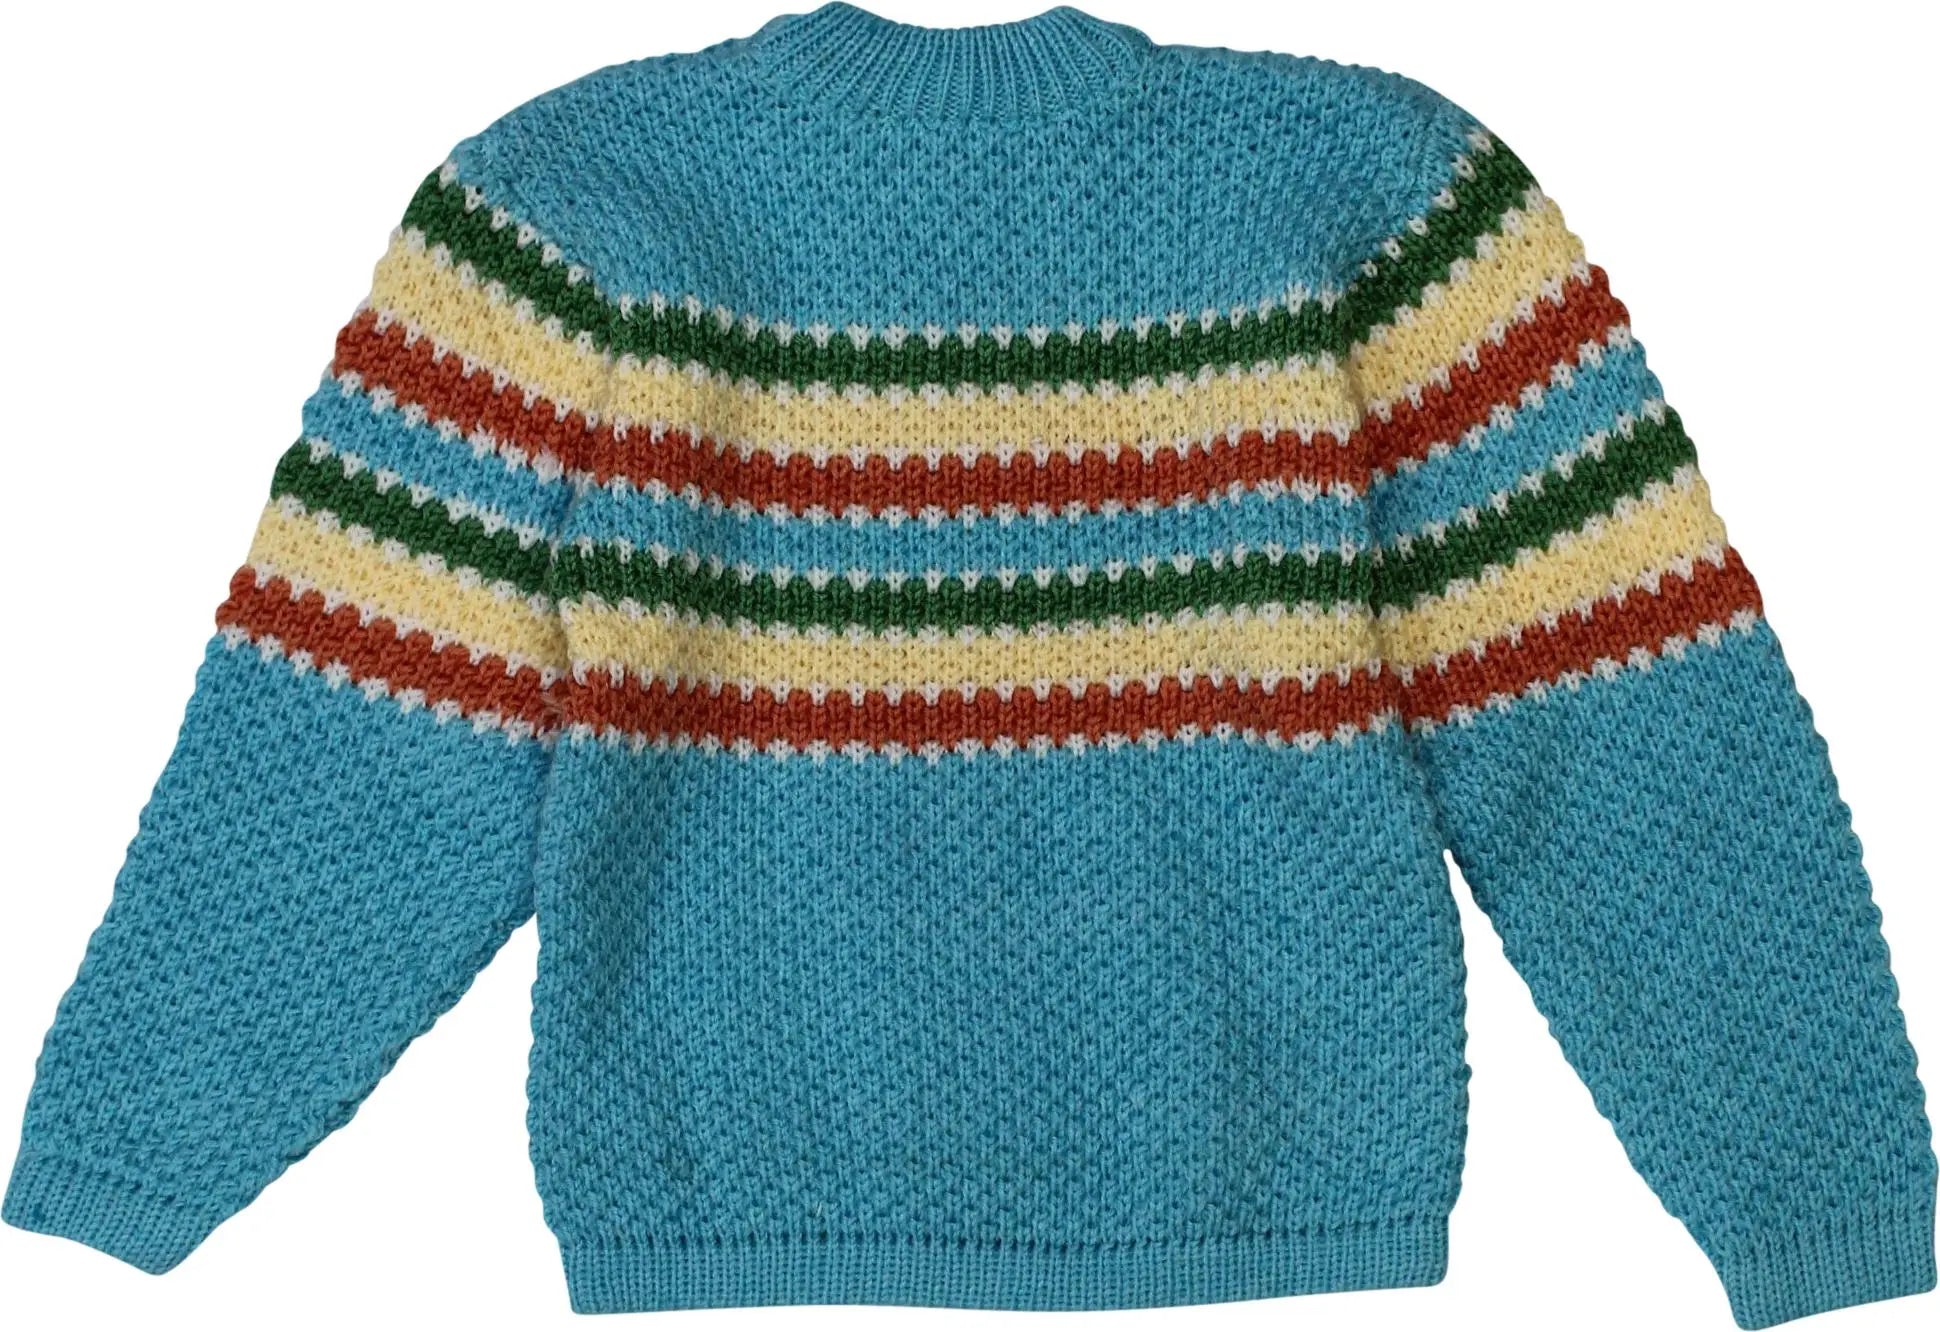 Handmade - Blue Knitted Sweater- ThriftTale.com - Vintage and second handclothing